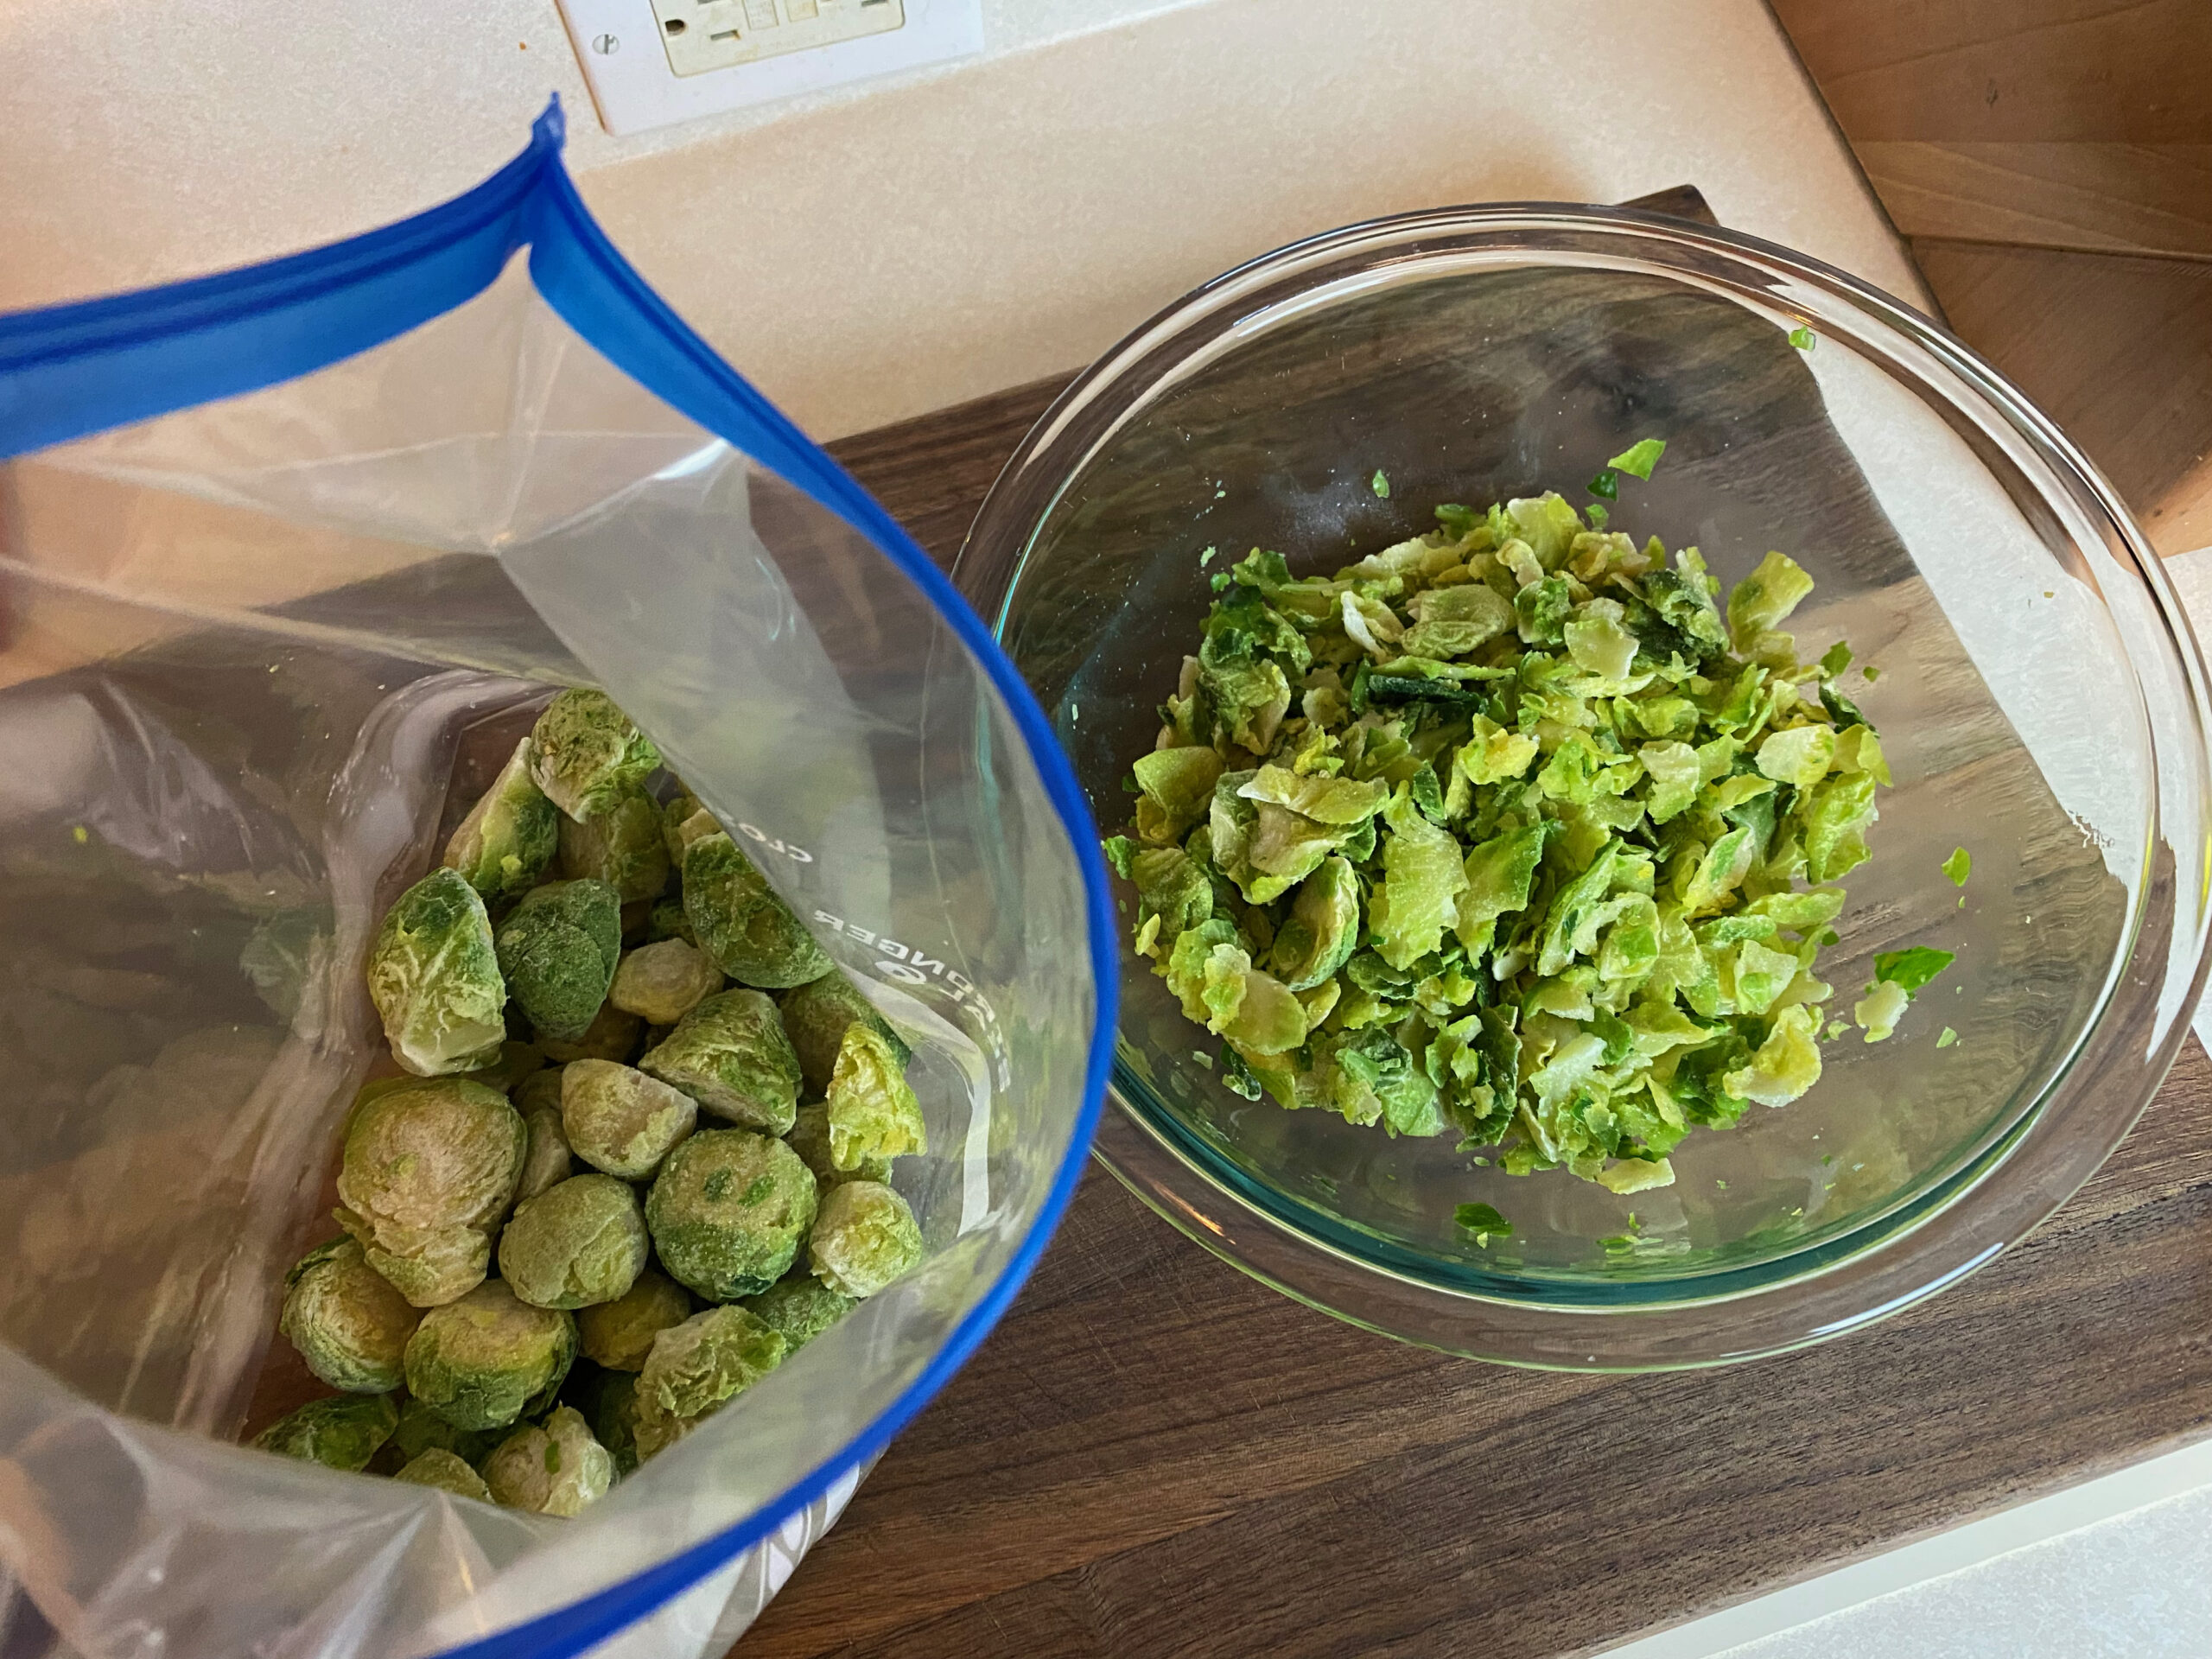 picture showing how much random waste was in the bag of brussels sprouts